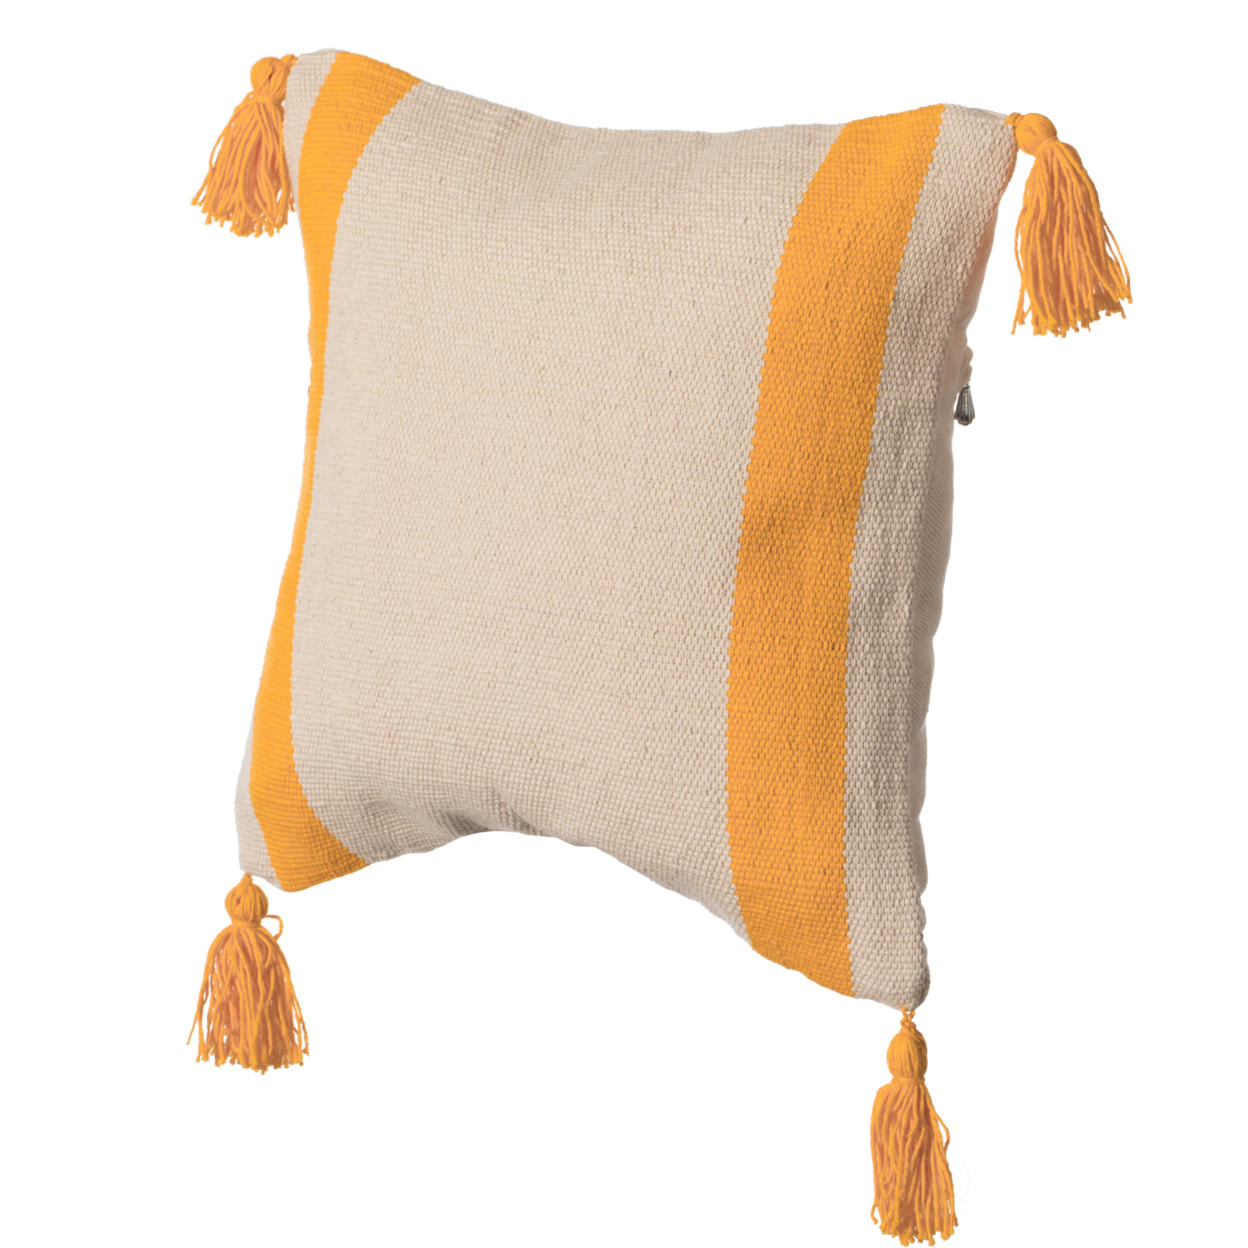 16 Handwoven Cotton Throw Pillow Cover With Side Stripes - Yellow